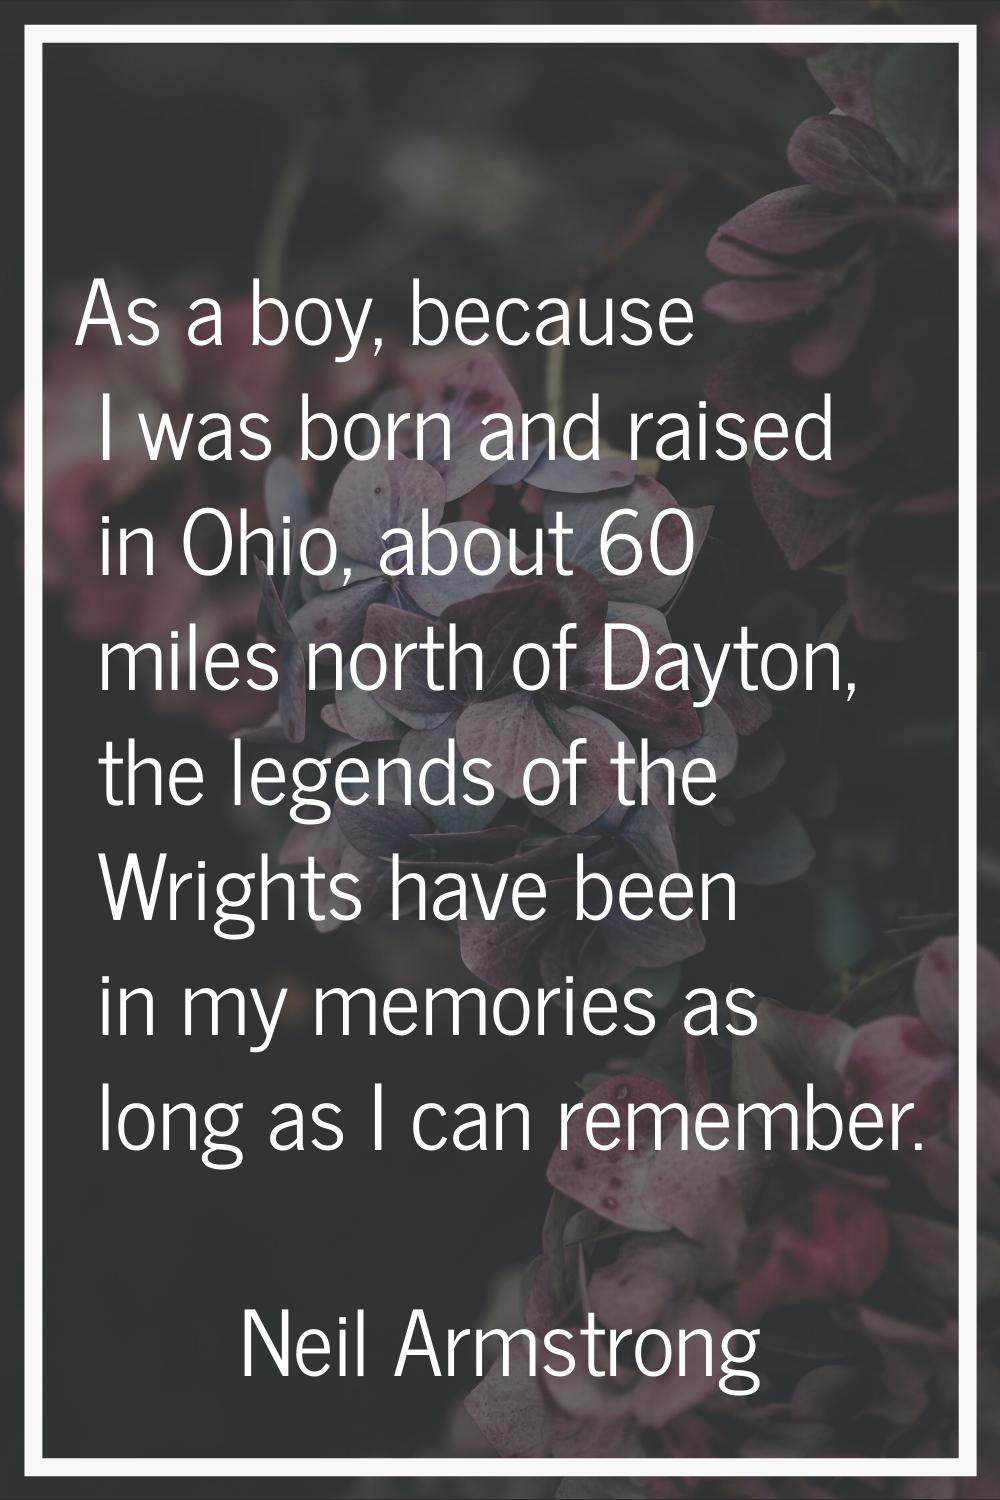 As a boy, because I was born and raised in Ohio, about 60 miles north of Dayton, the legends of the